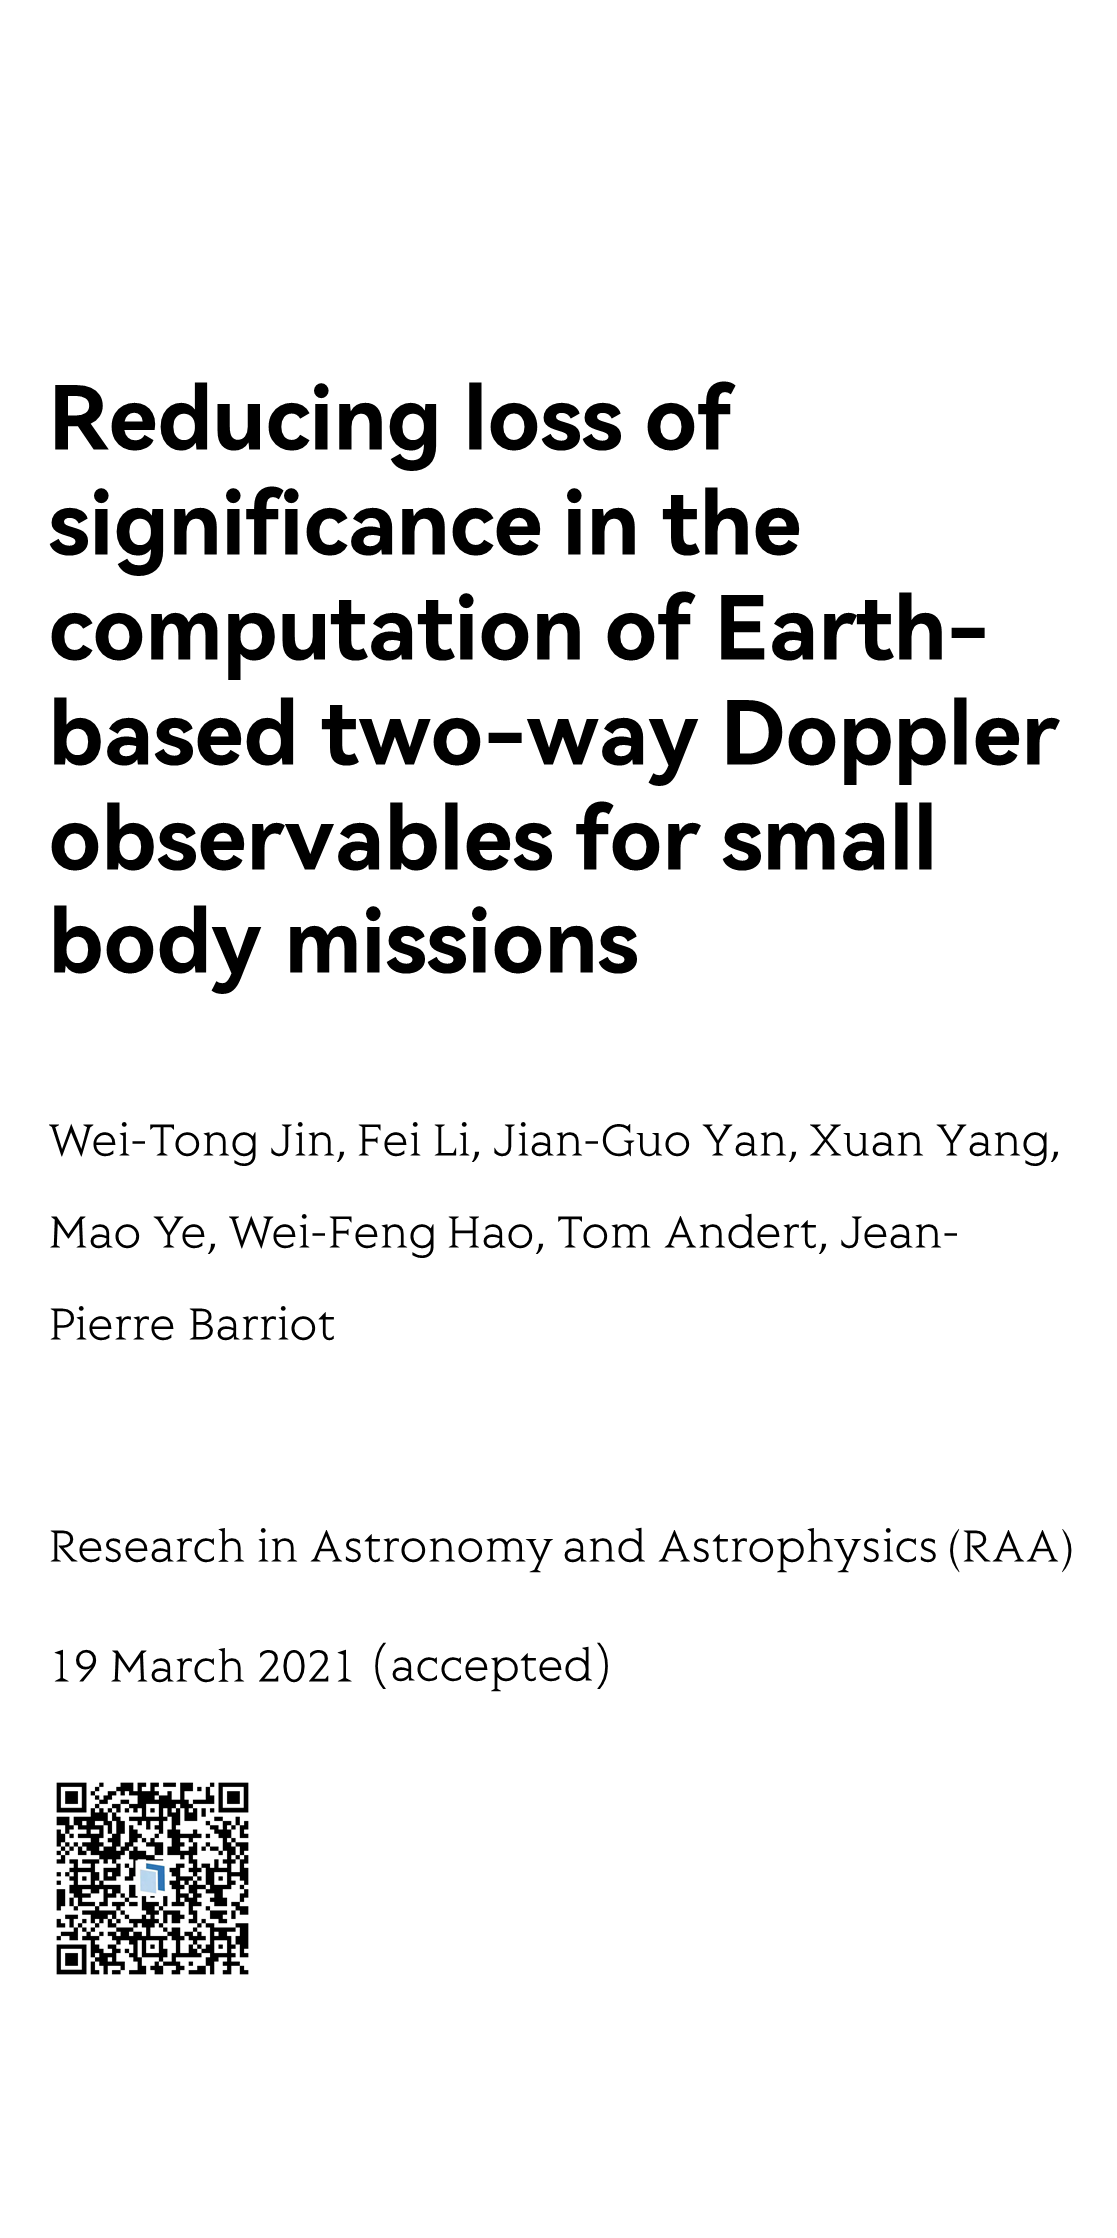 Reducing loss of significance in the computation of Earth-based two-way Doppler observables for small body missions_1